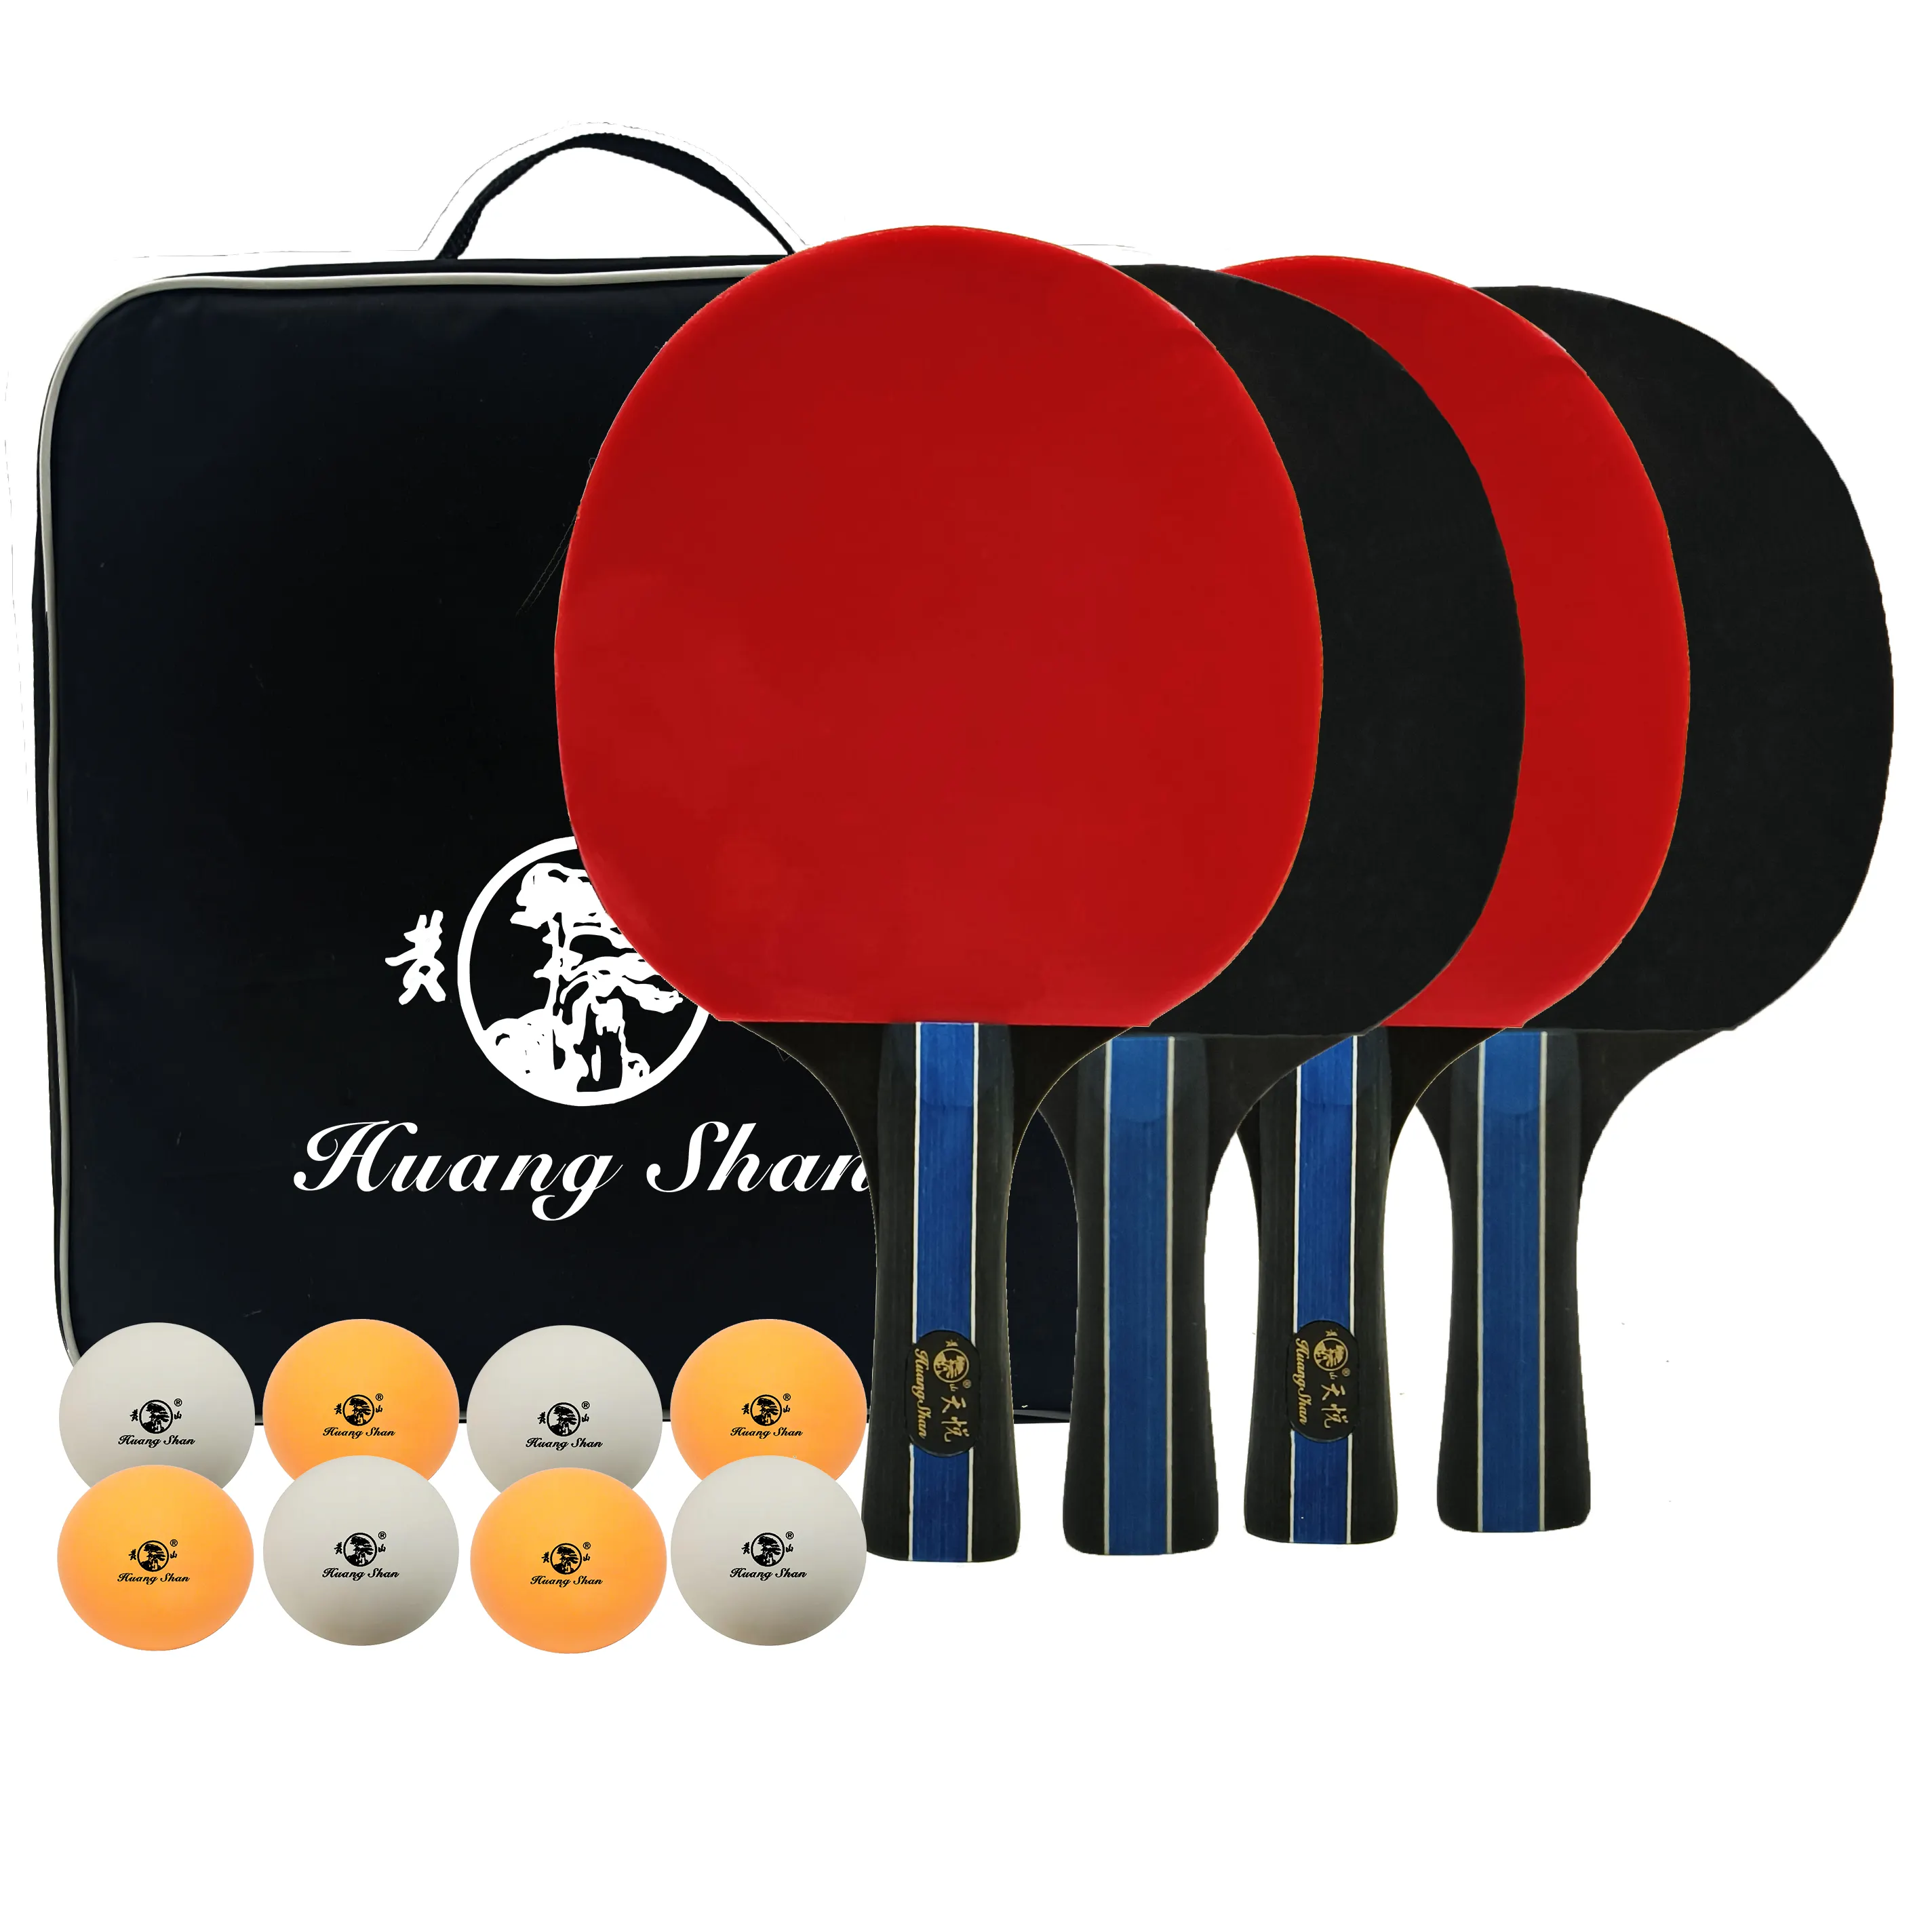 Professional Pingpong Racket Cheap Table Tennis Paddle Set Retractable Net Carry Bag 4 Player Table Tennis Racket Profession